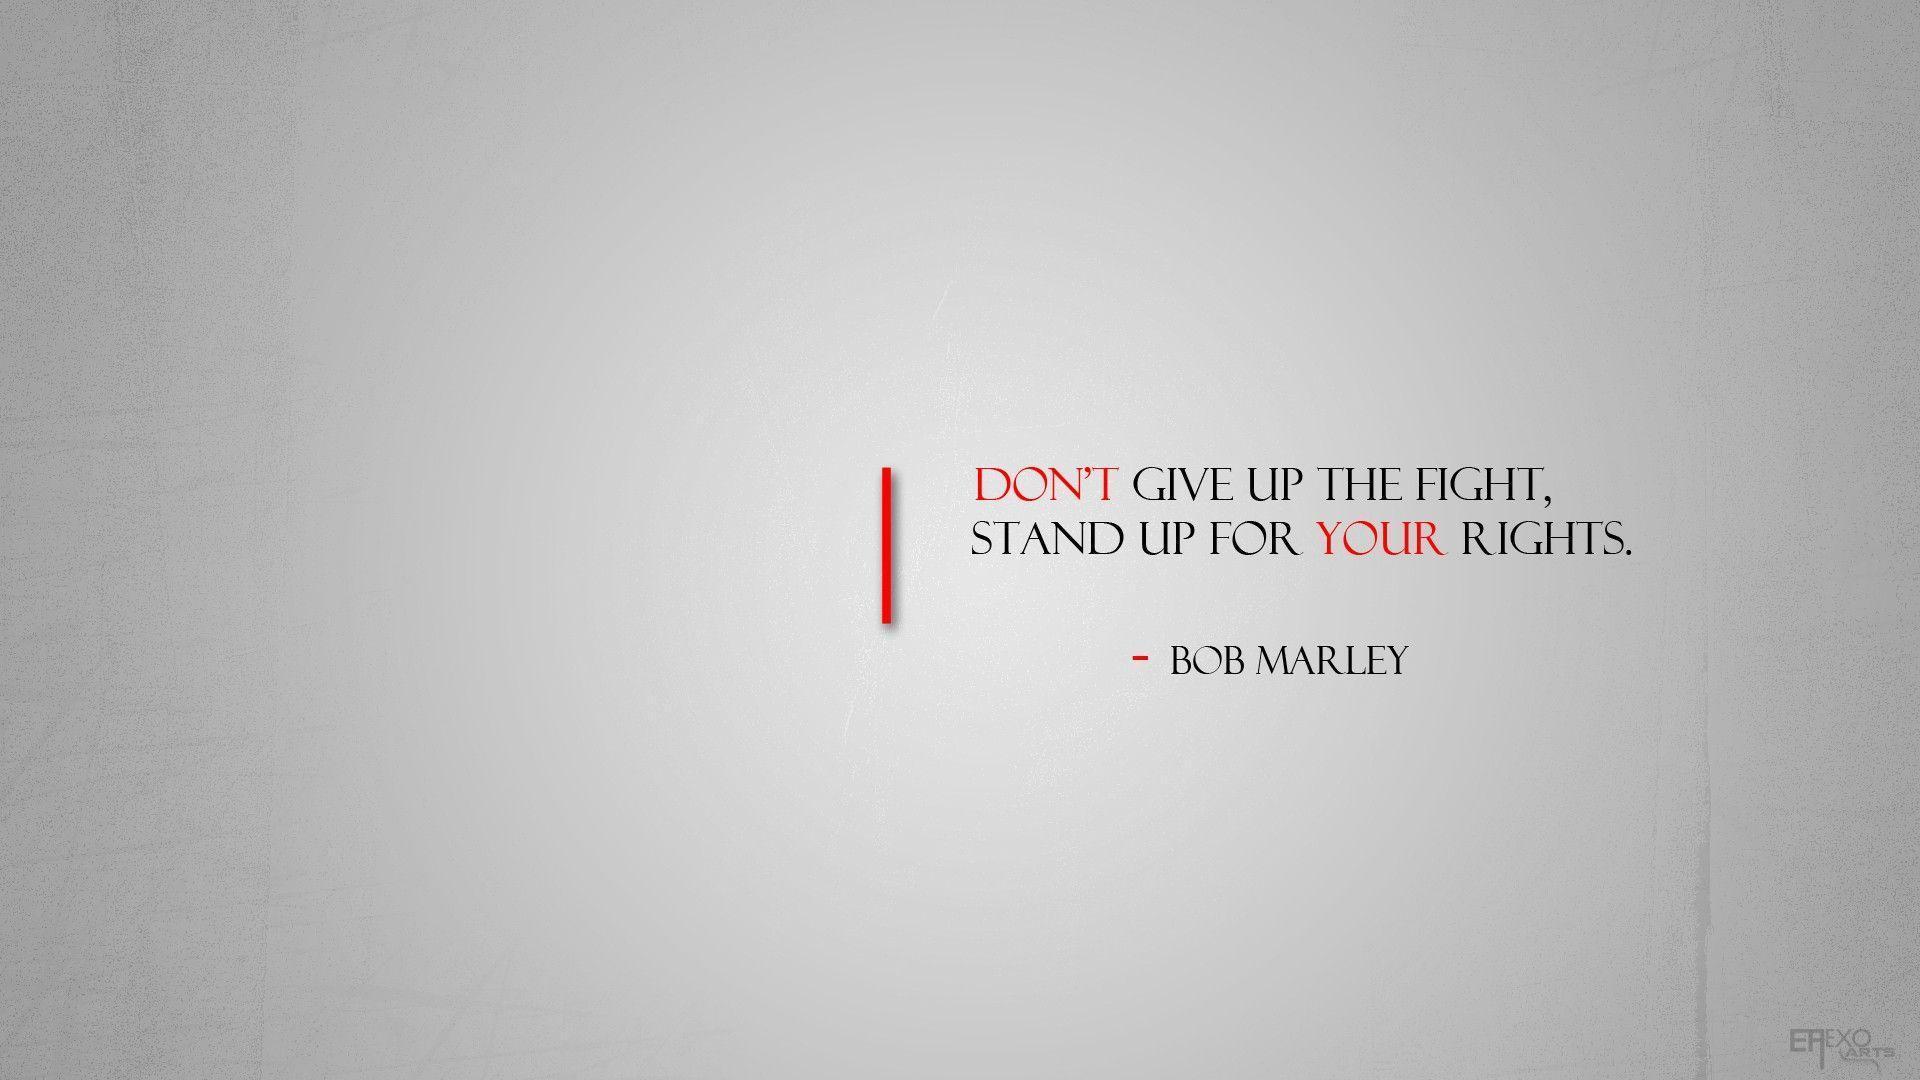 Bob Marley Quote Wallpapers For Desktop 8215 Wallpapers